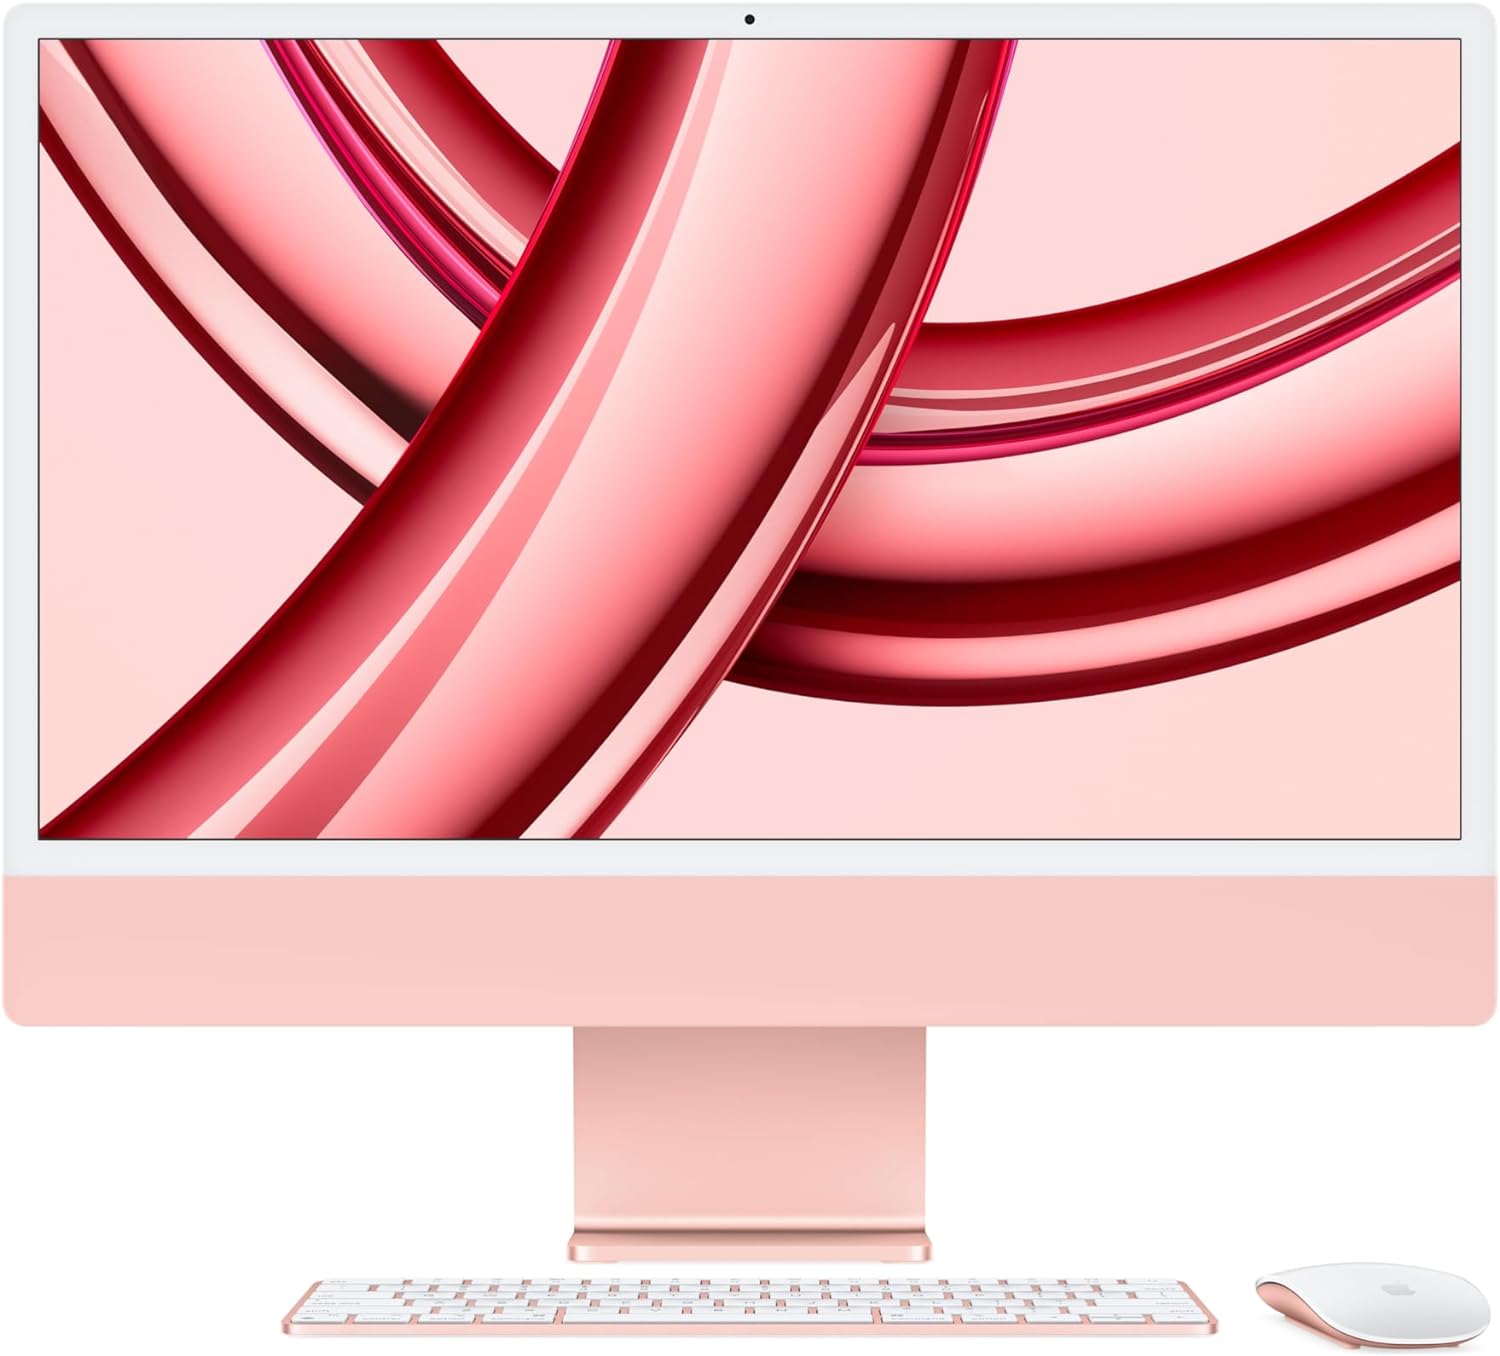 SKU: 0194253778257, Barcode: 194253778257 - Pink Apple 2023 iMac with M3 chip, 8GB RAM, 256GB SSD - Supercharged performance for work and play.